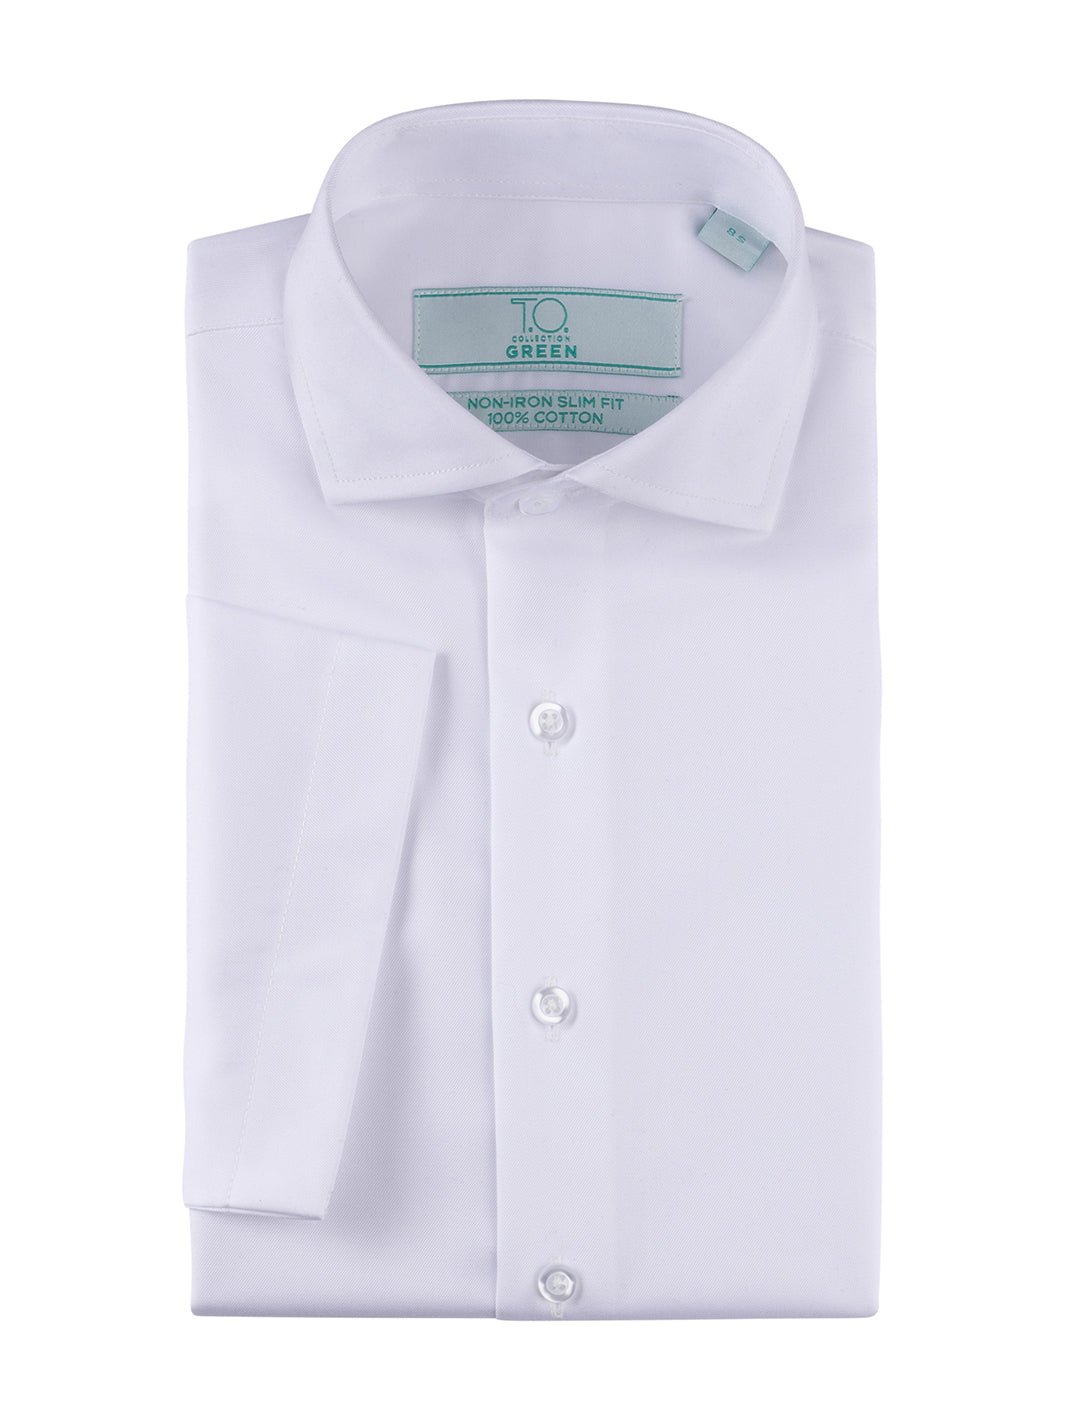 Boy's White Dress Shirt – The His Place